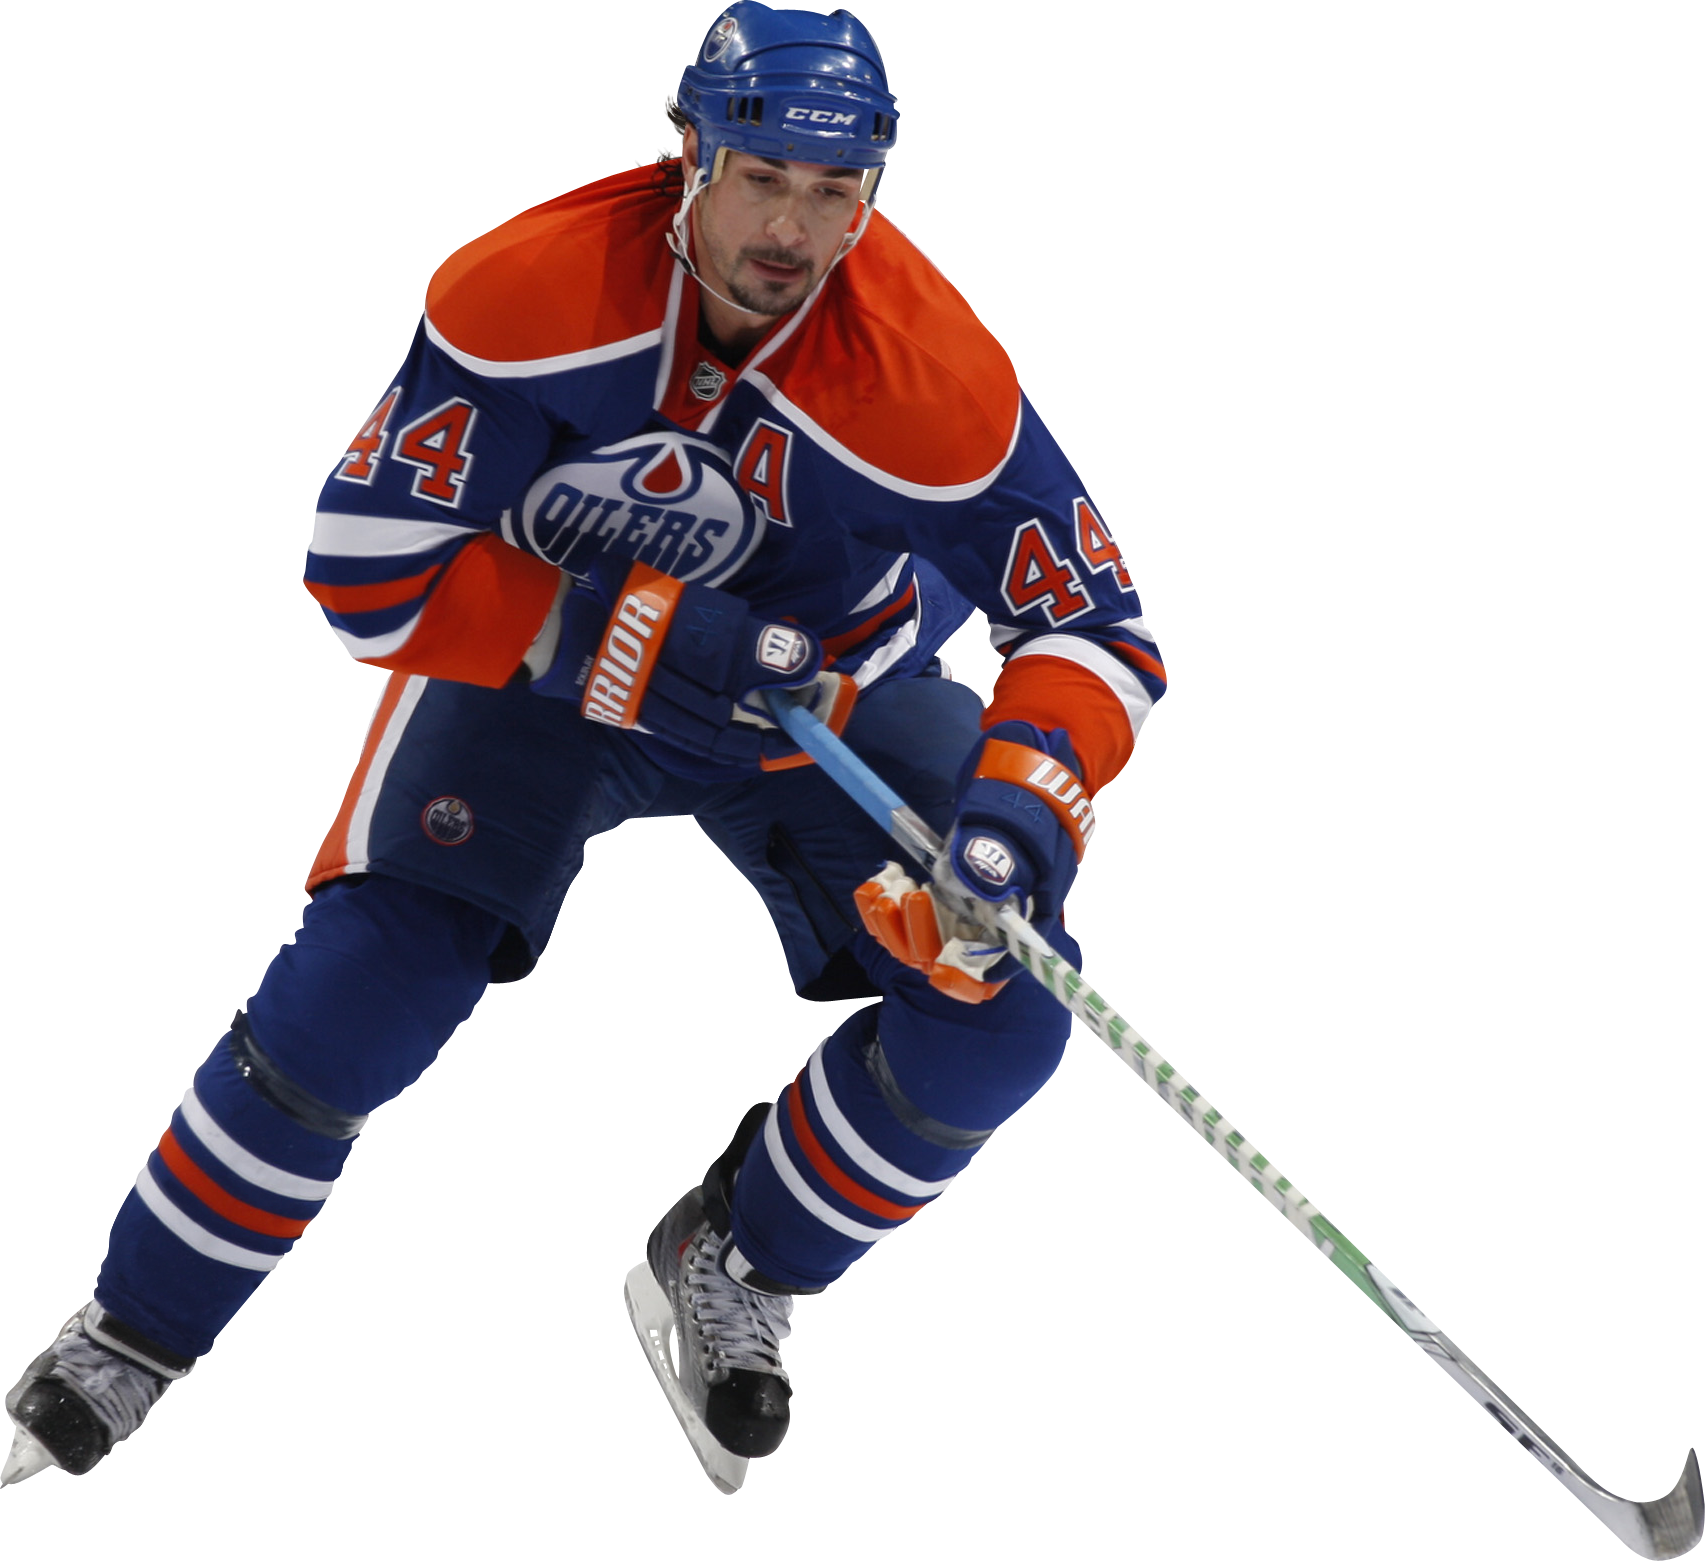 Player Hockey PNG Free Photo PNG Image